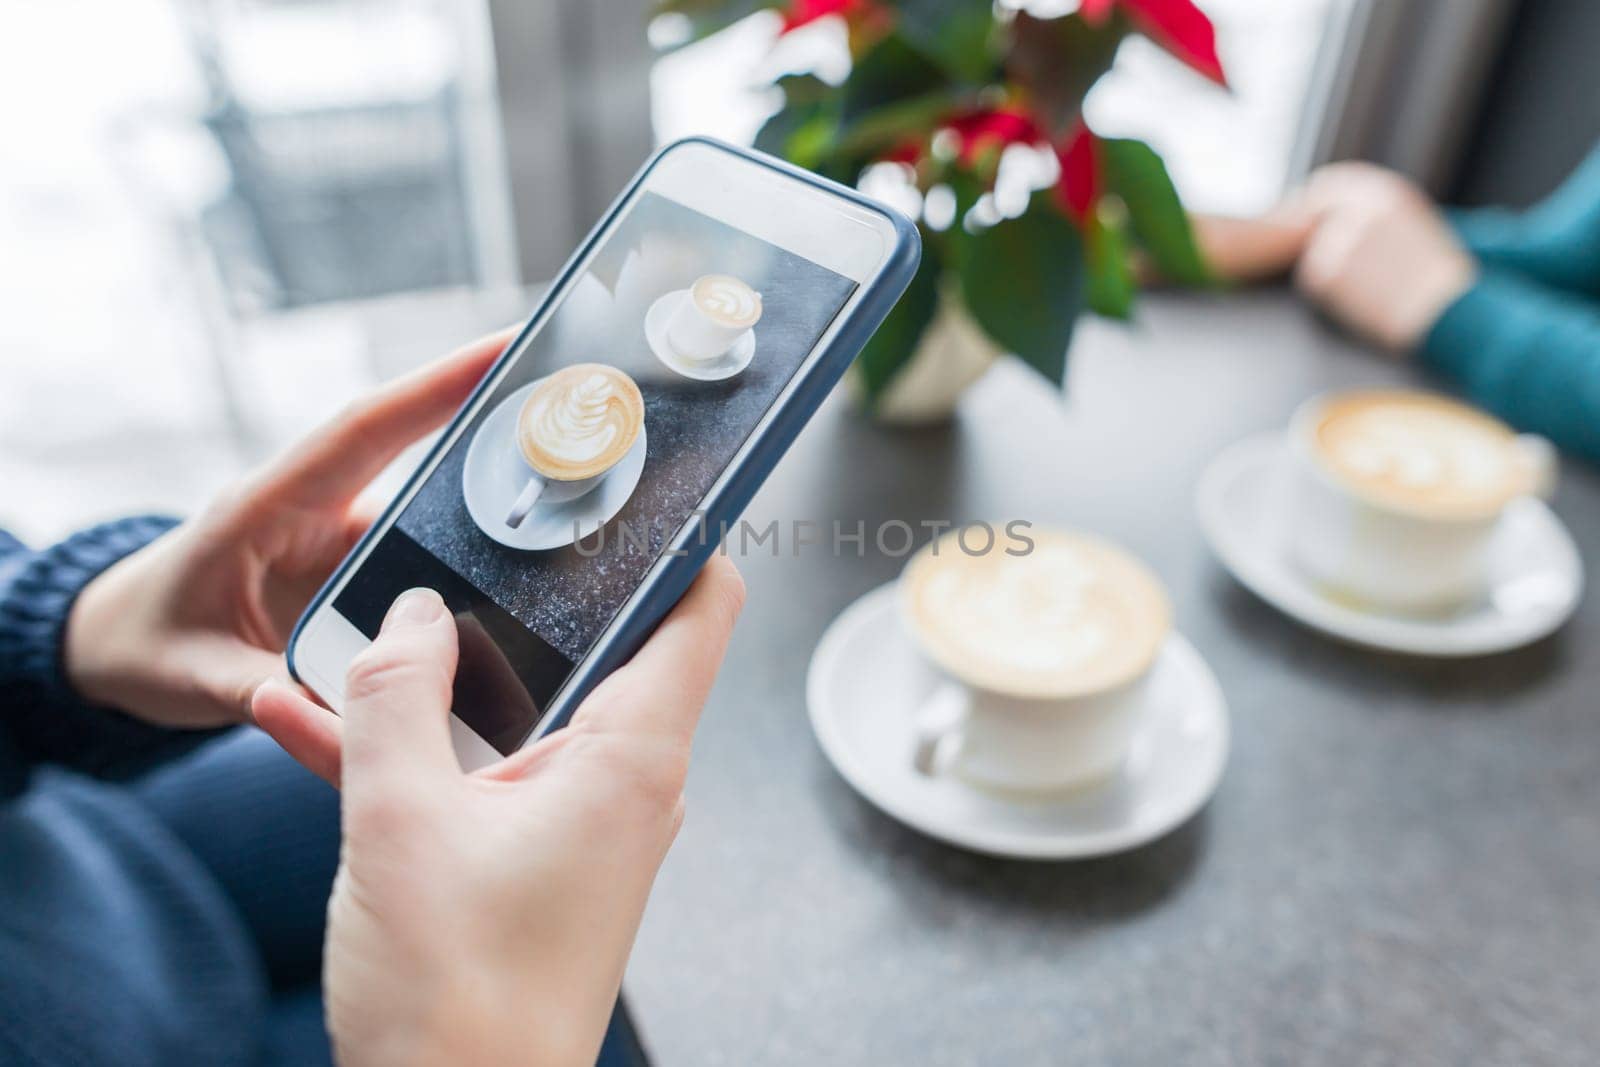 Coffee art, hands of woman taking photos on the phone two cups with latte art, background gray stone surface of the table coffee shop